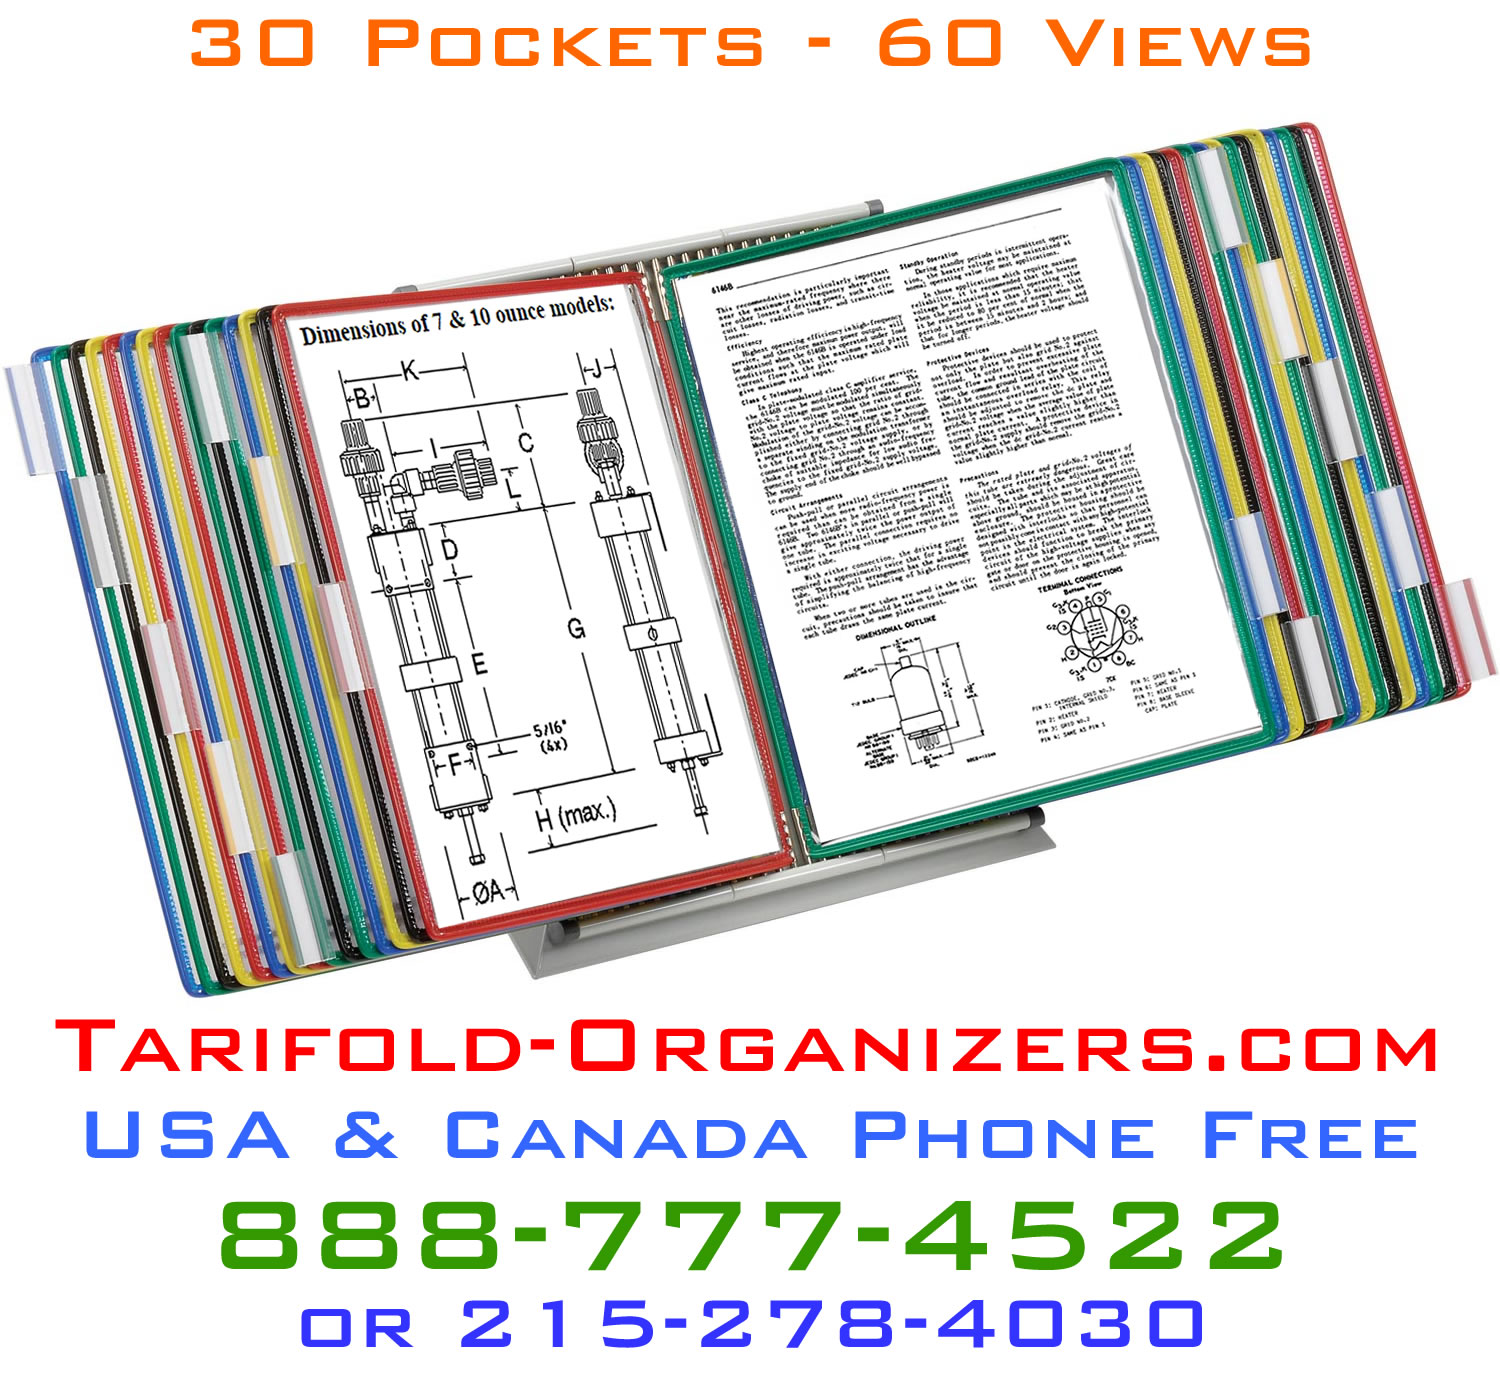 Tarifold Organizers D293 desktop organizer facilitates direct access to scores of data sheets for you immediate and ready reference requirements.